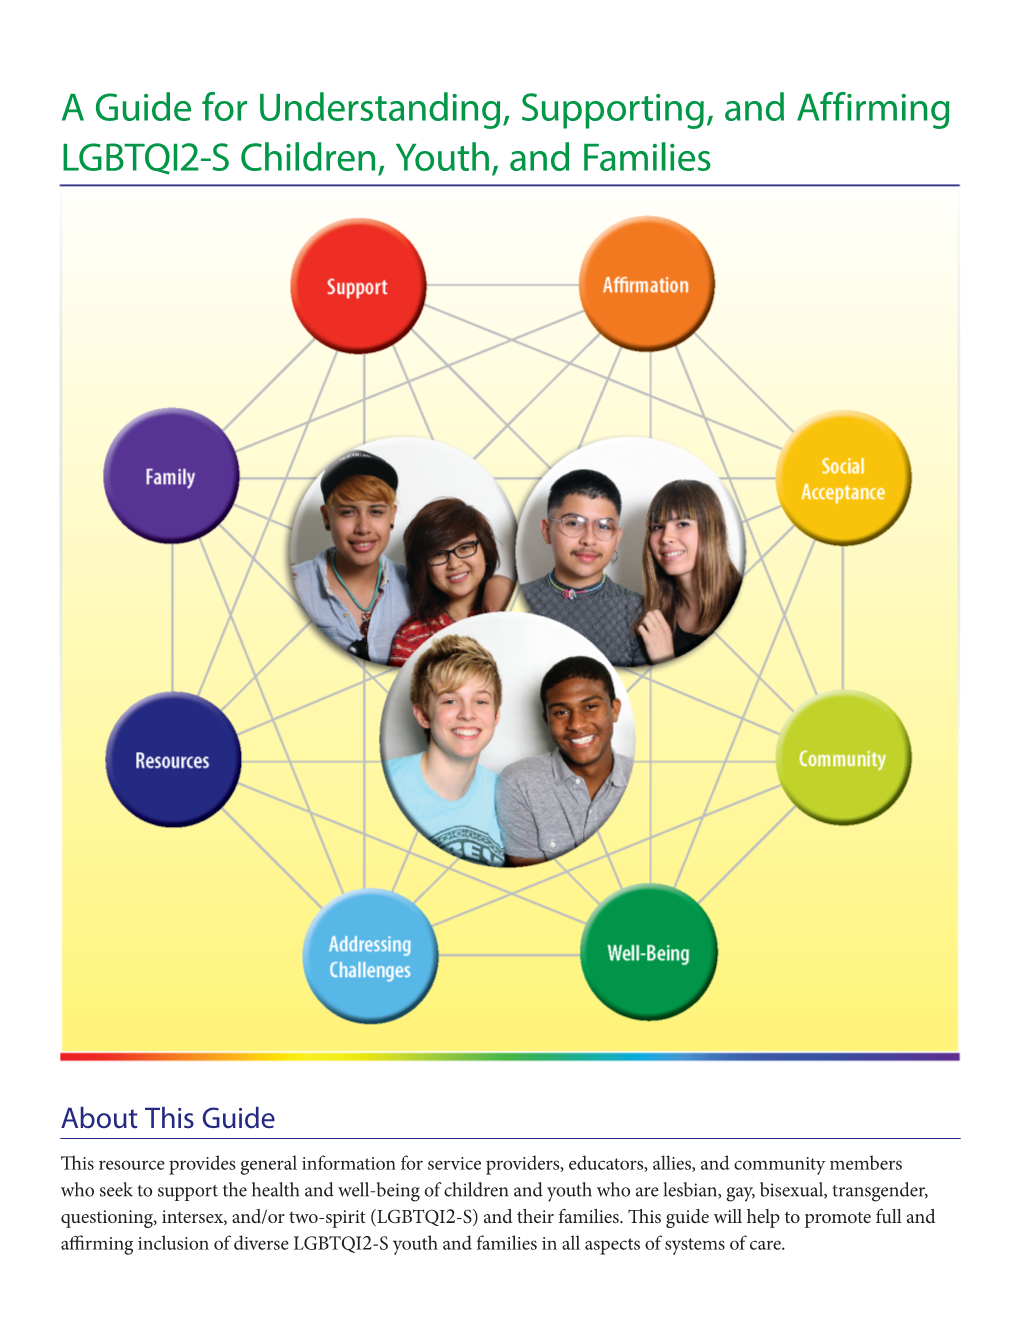 A Guide for Understanding, Supporting, and Affirming LGBTQI2-S Children, Youth, and Families